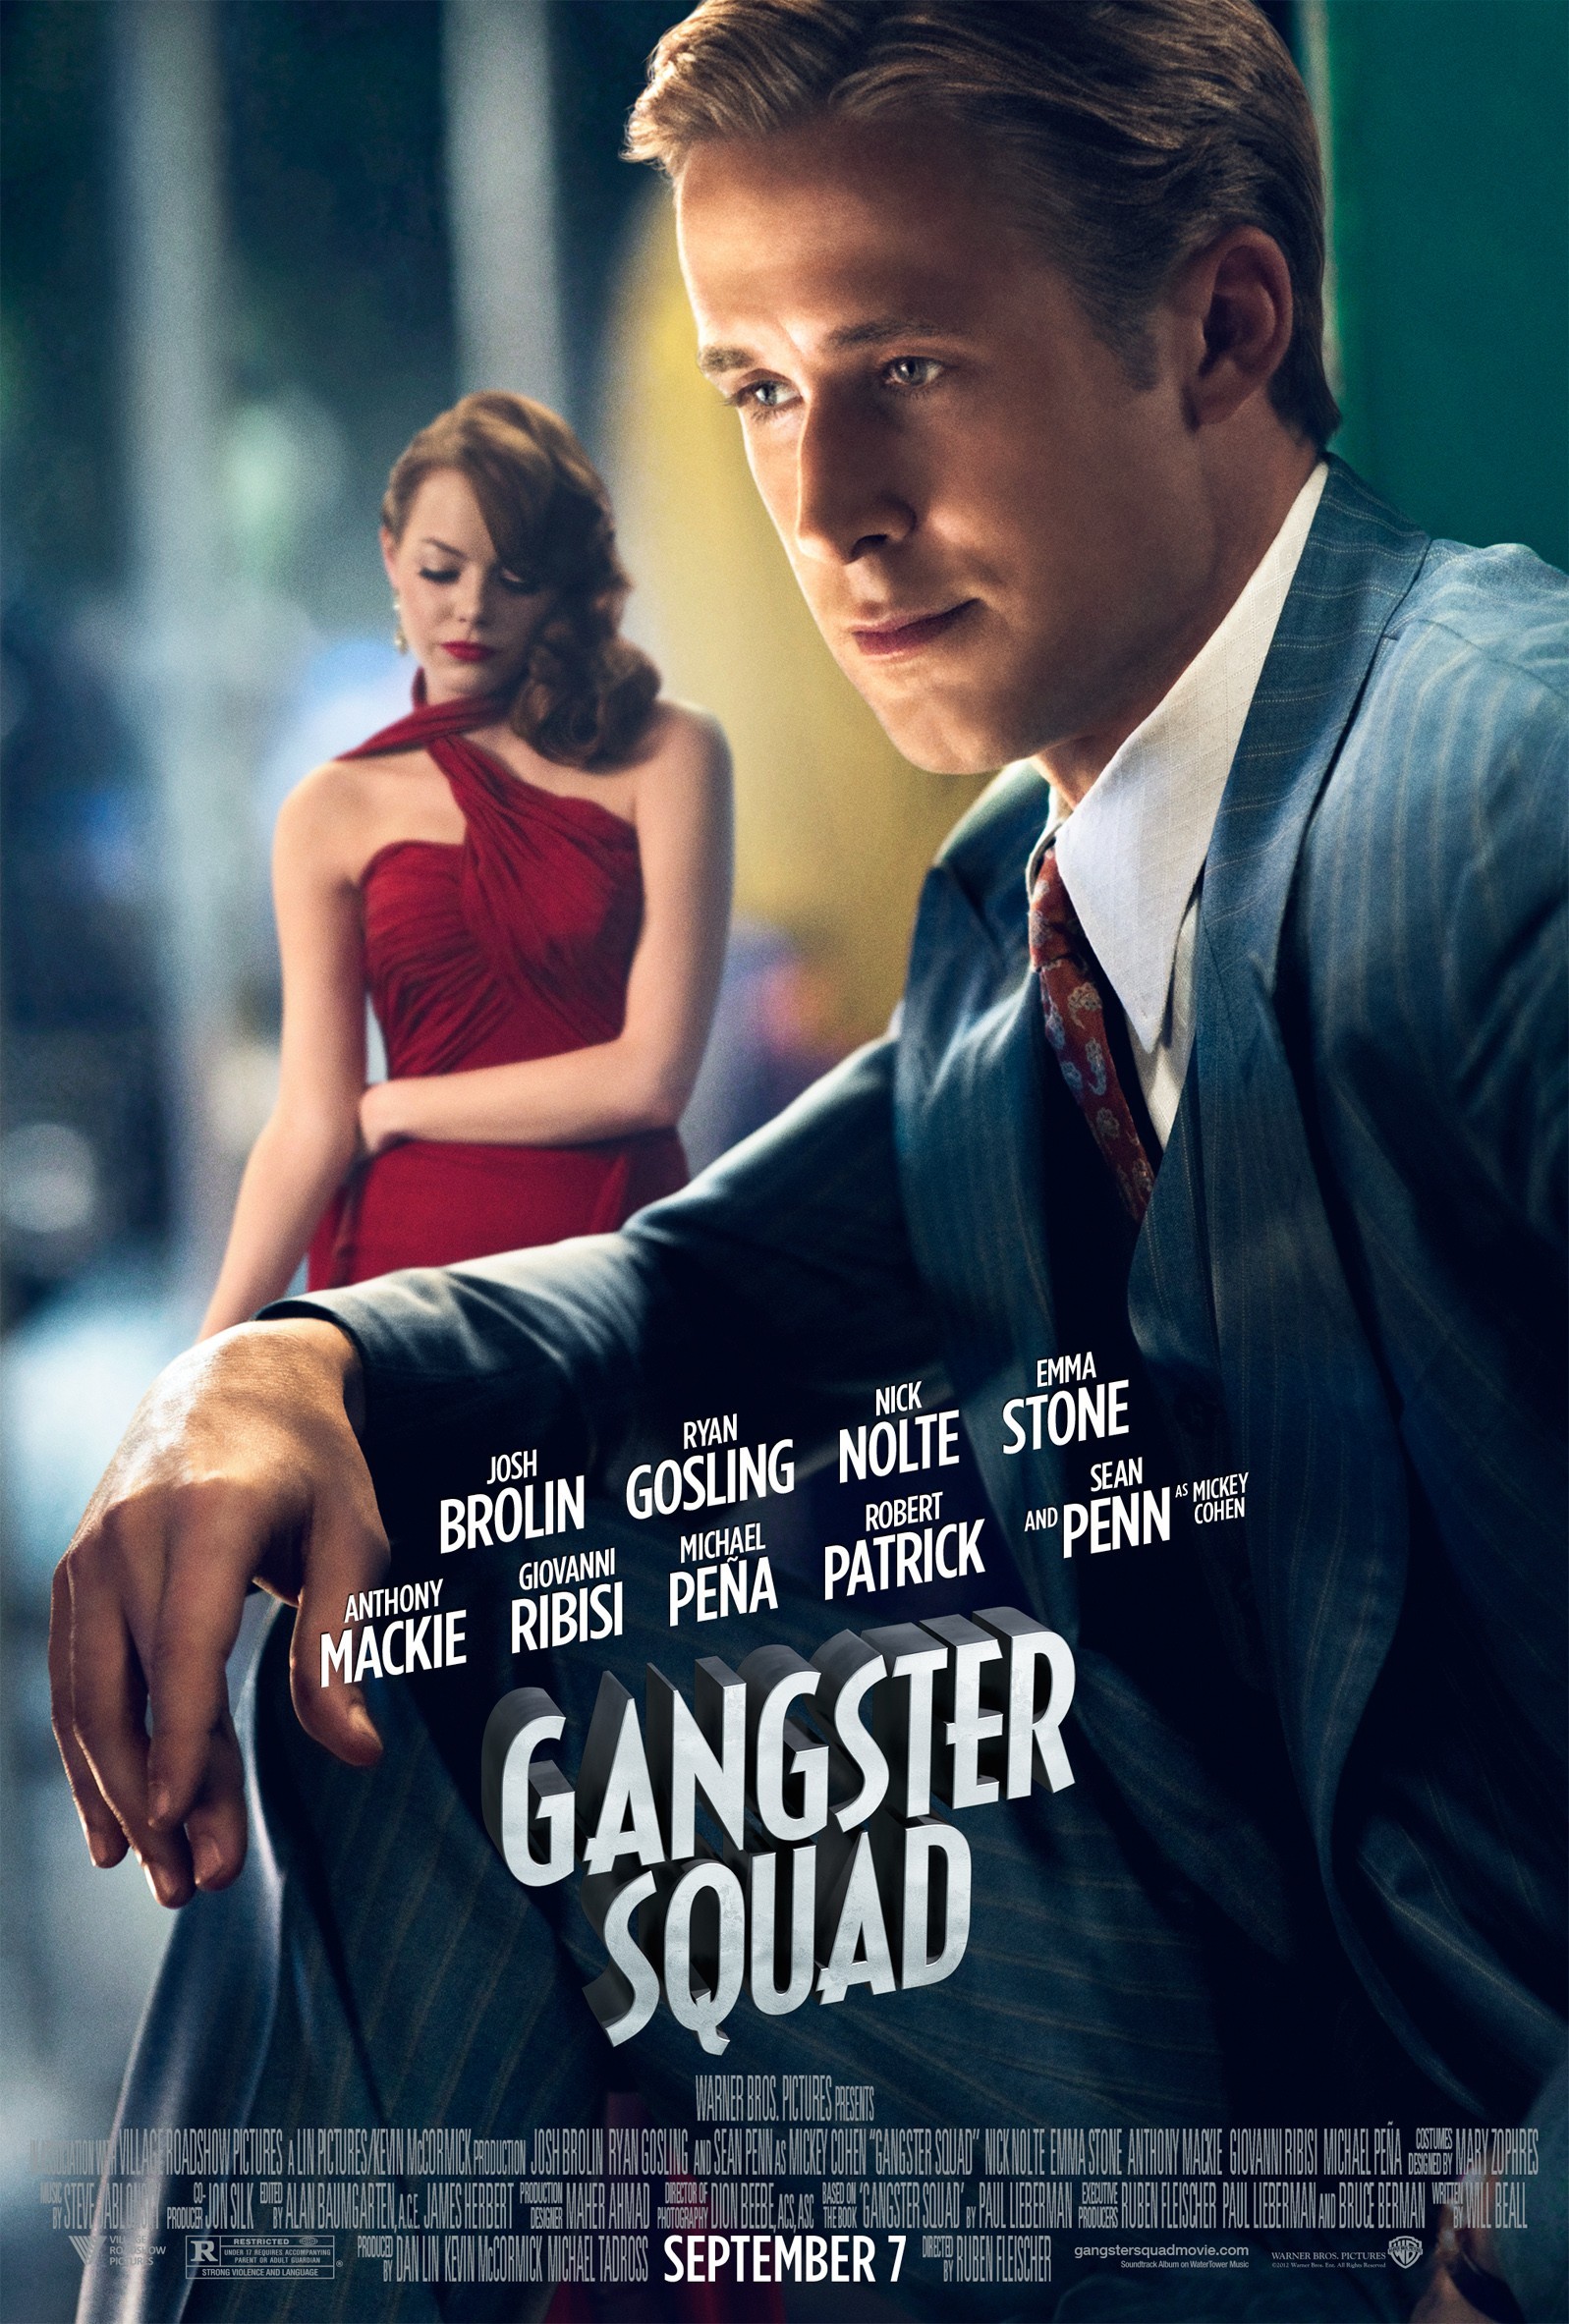 Gangster-Squad-Character-Poster-Ryan-Gosling